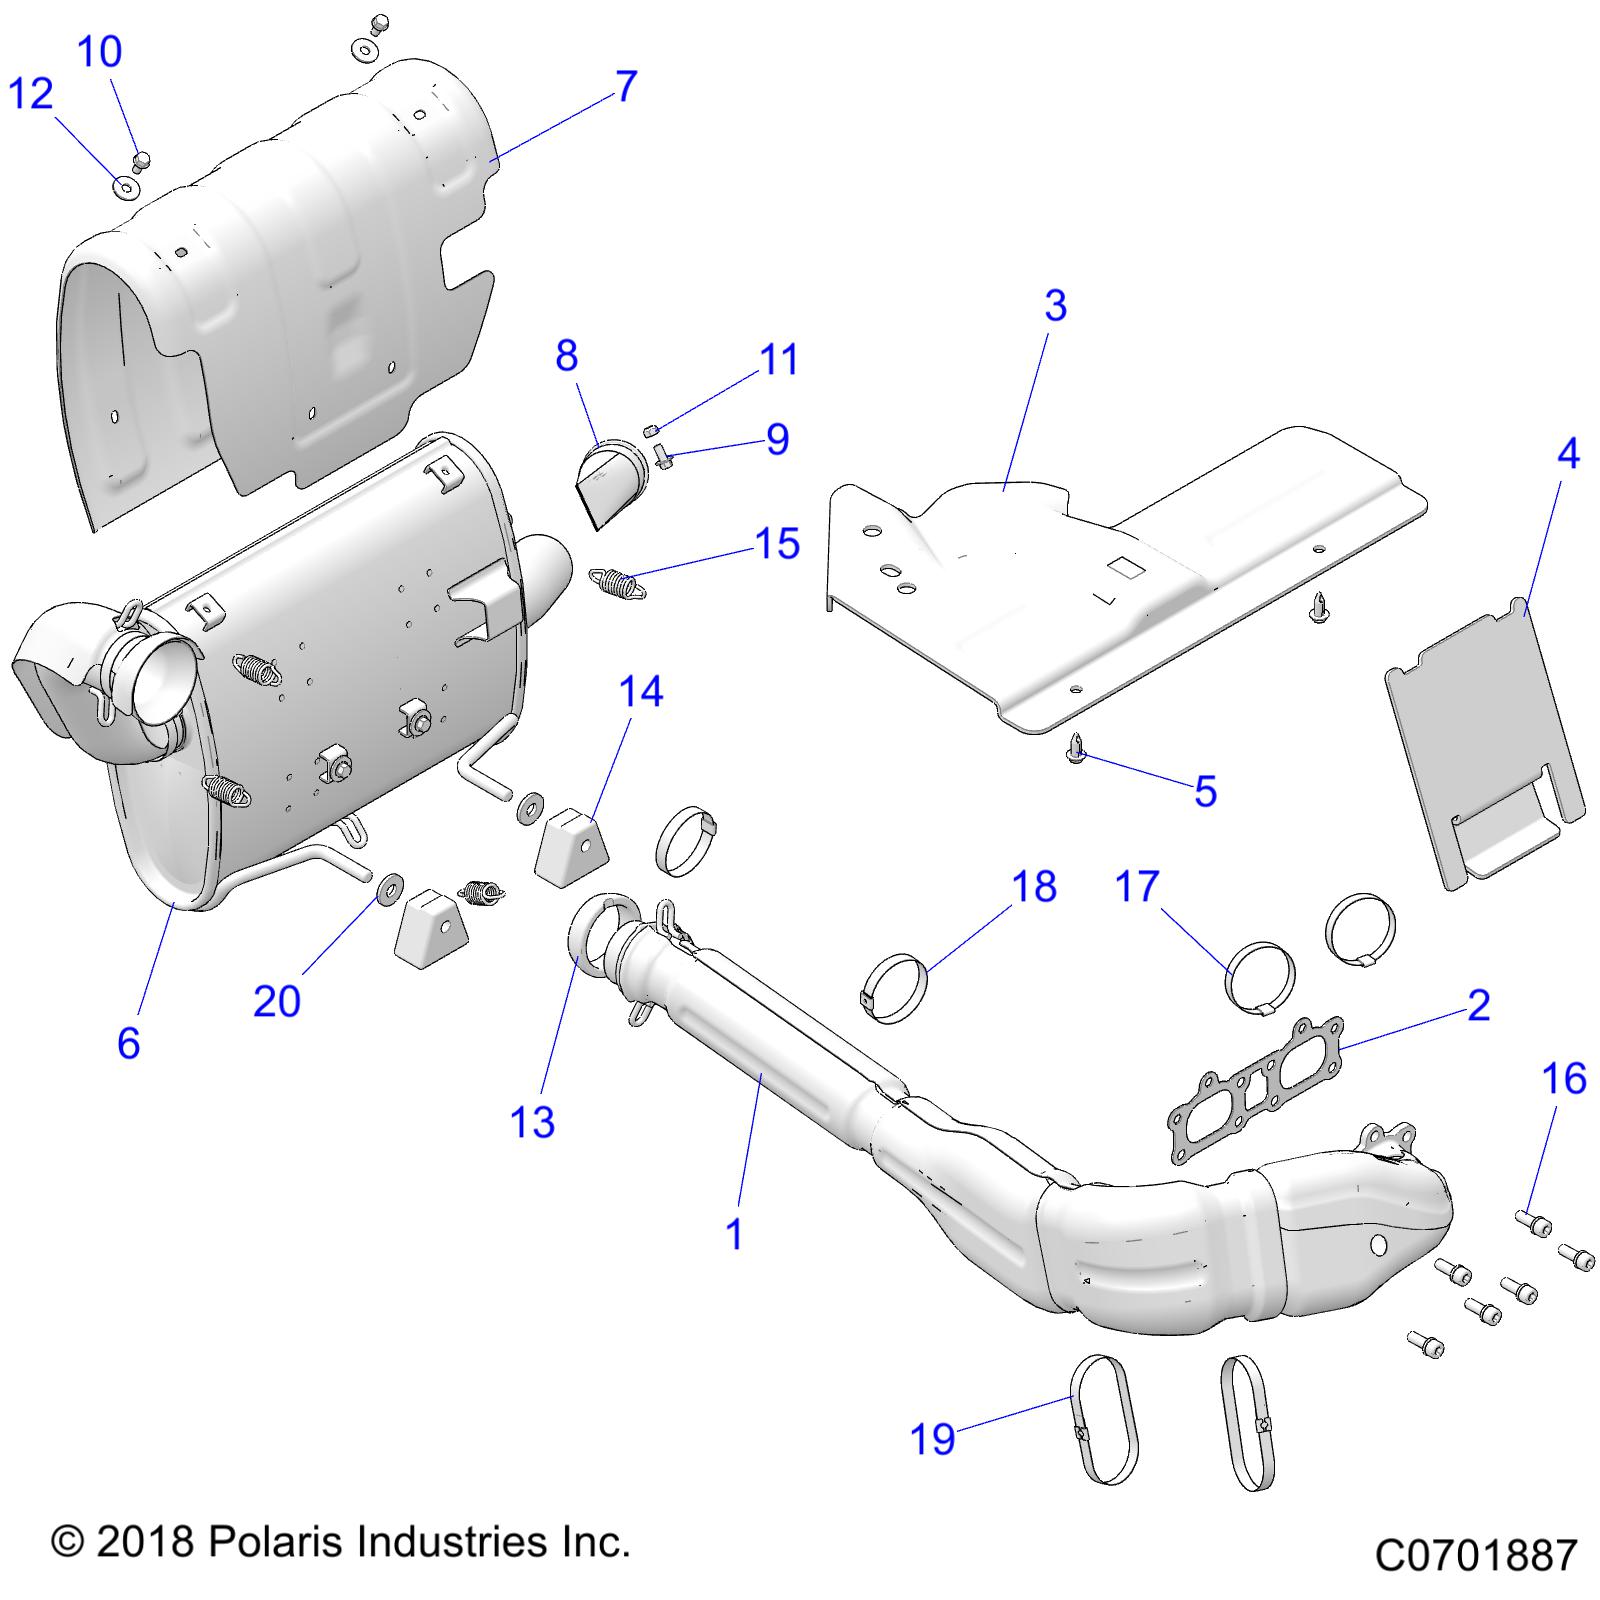 Part Number : 7081915 CLAMP-HEAT SHIELD EXHAUST